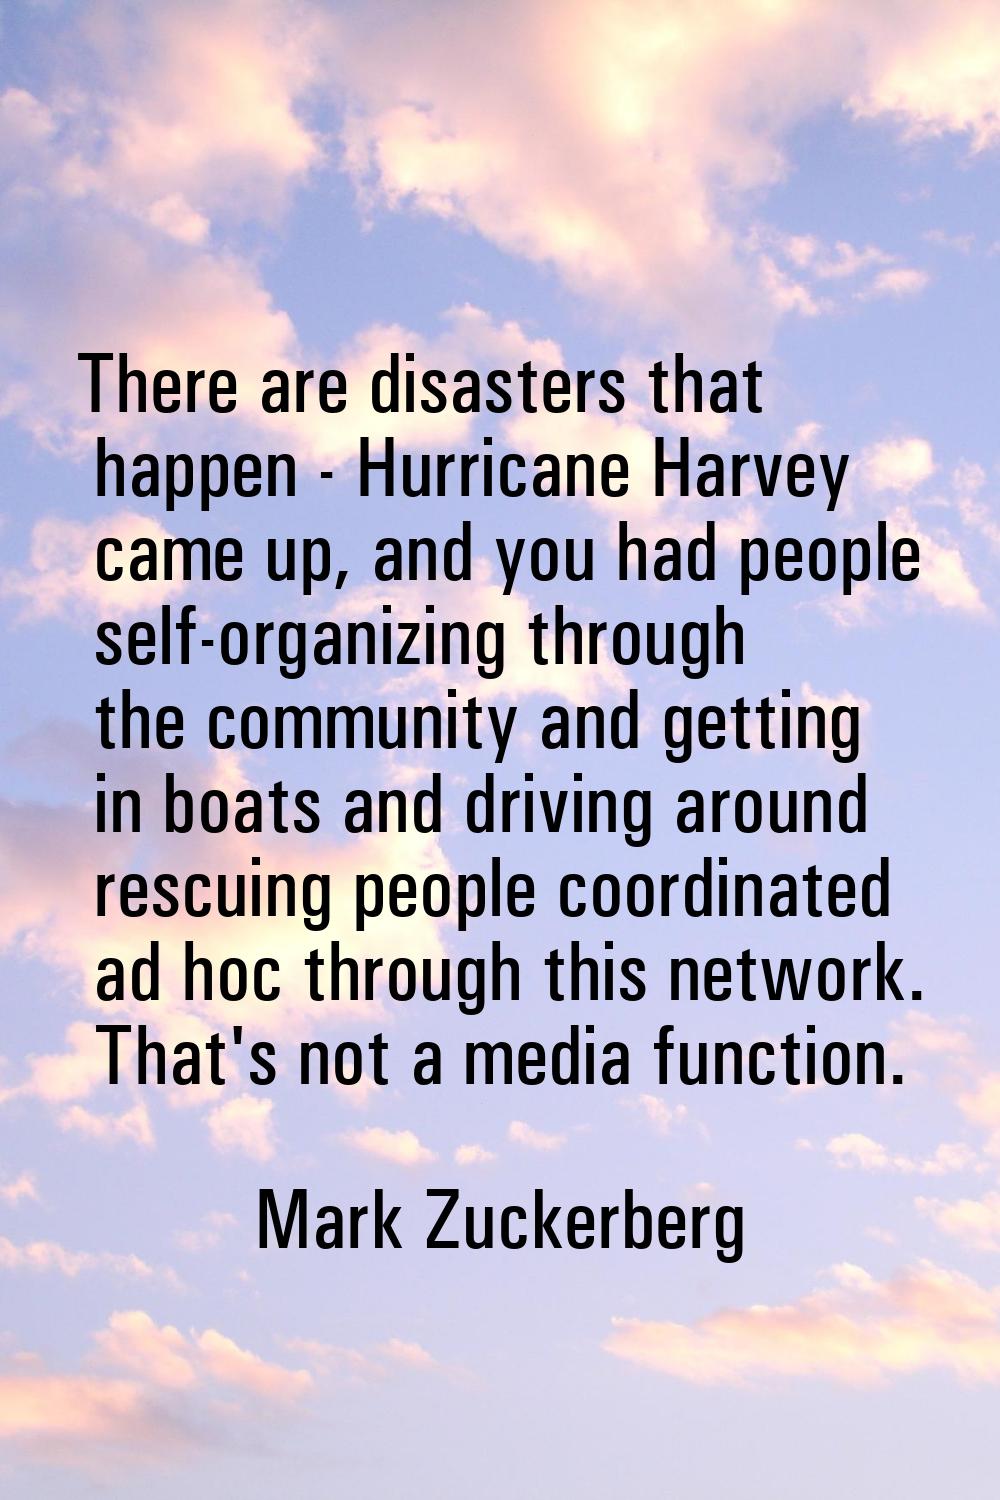 There are disasters that happen - Hurricane Harvey came up, and you had people self-organizing thro